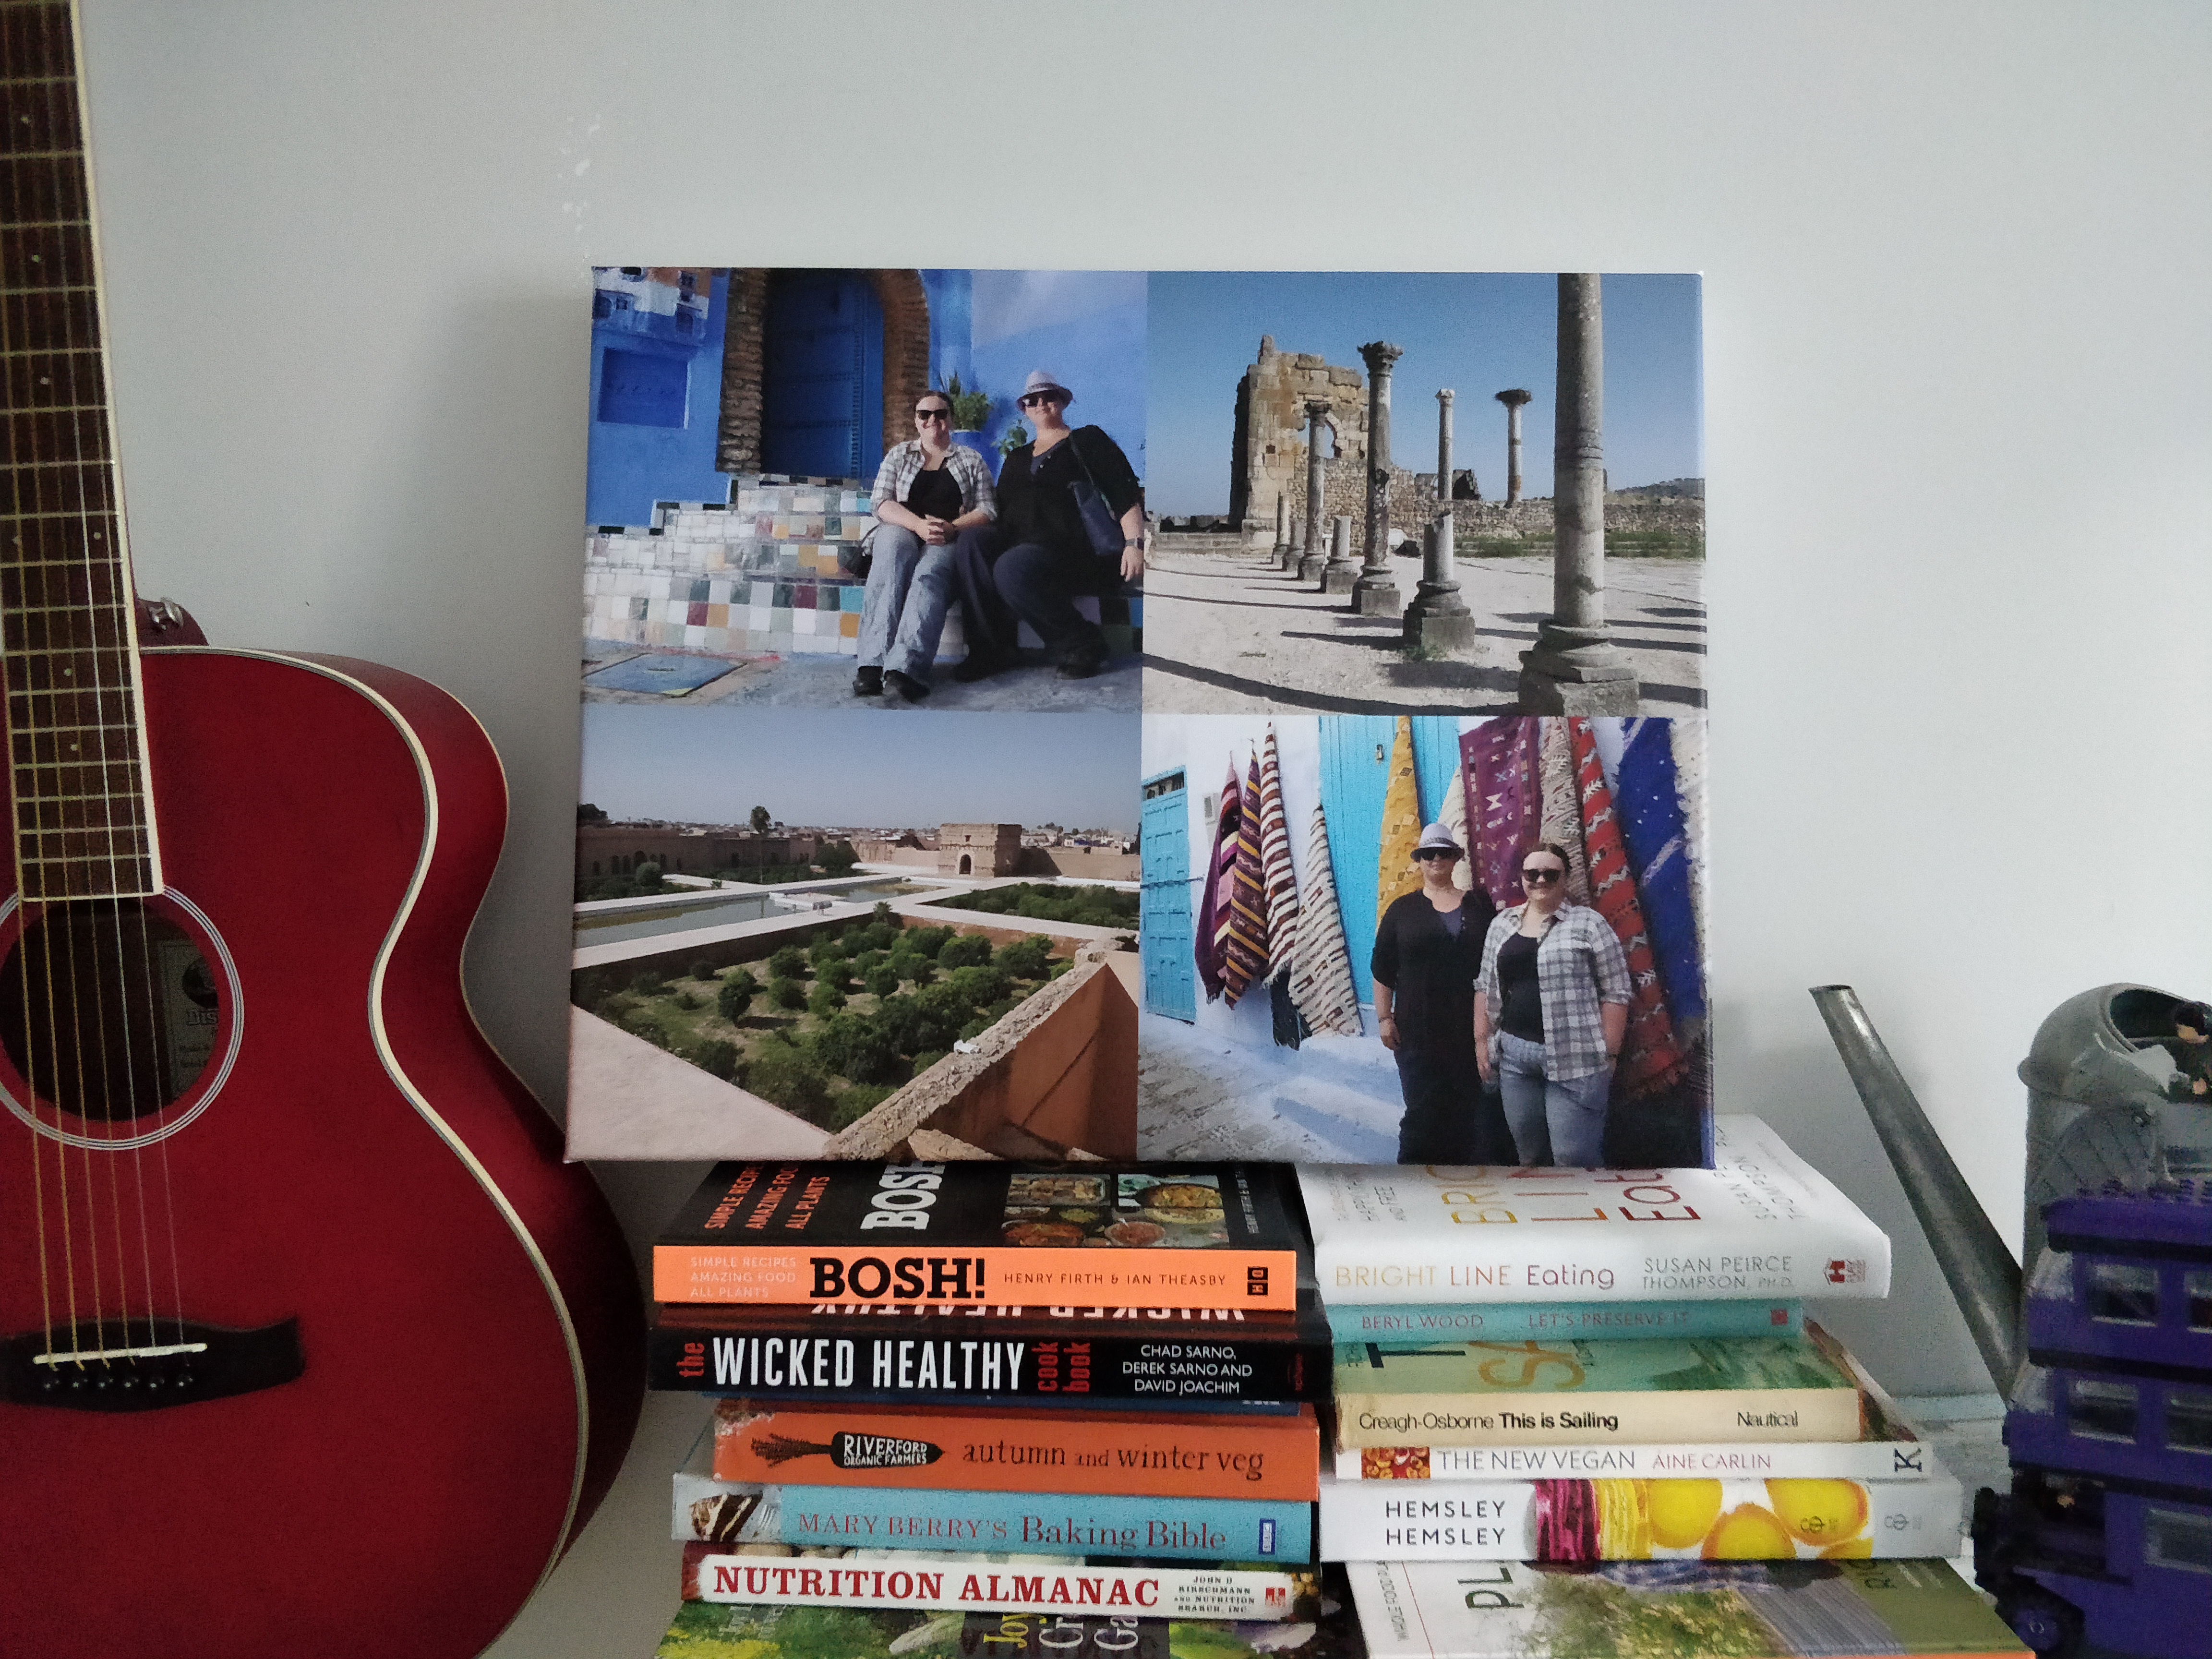 Tesco Photo Personalised Canvas with Travel Photos